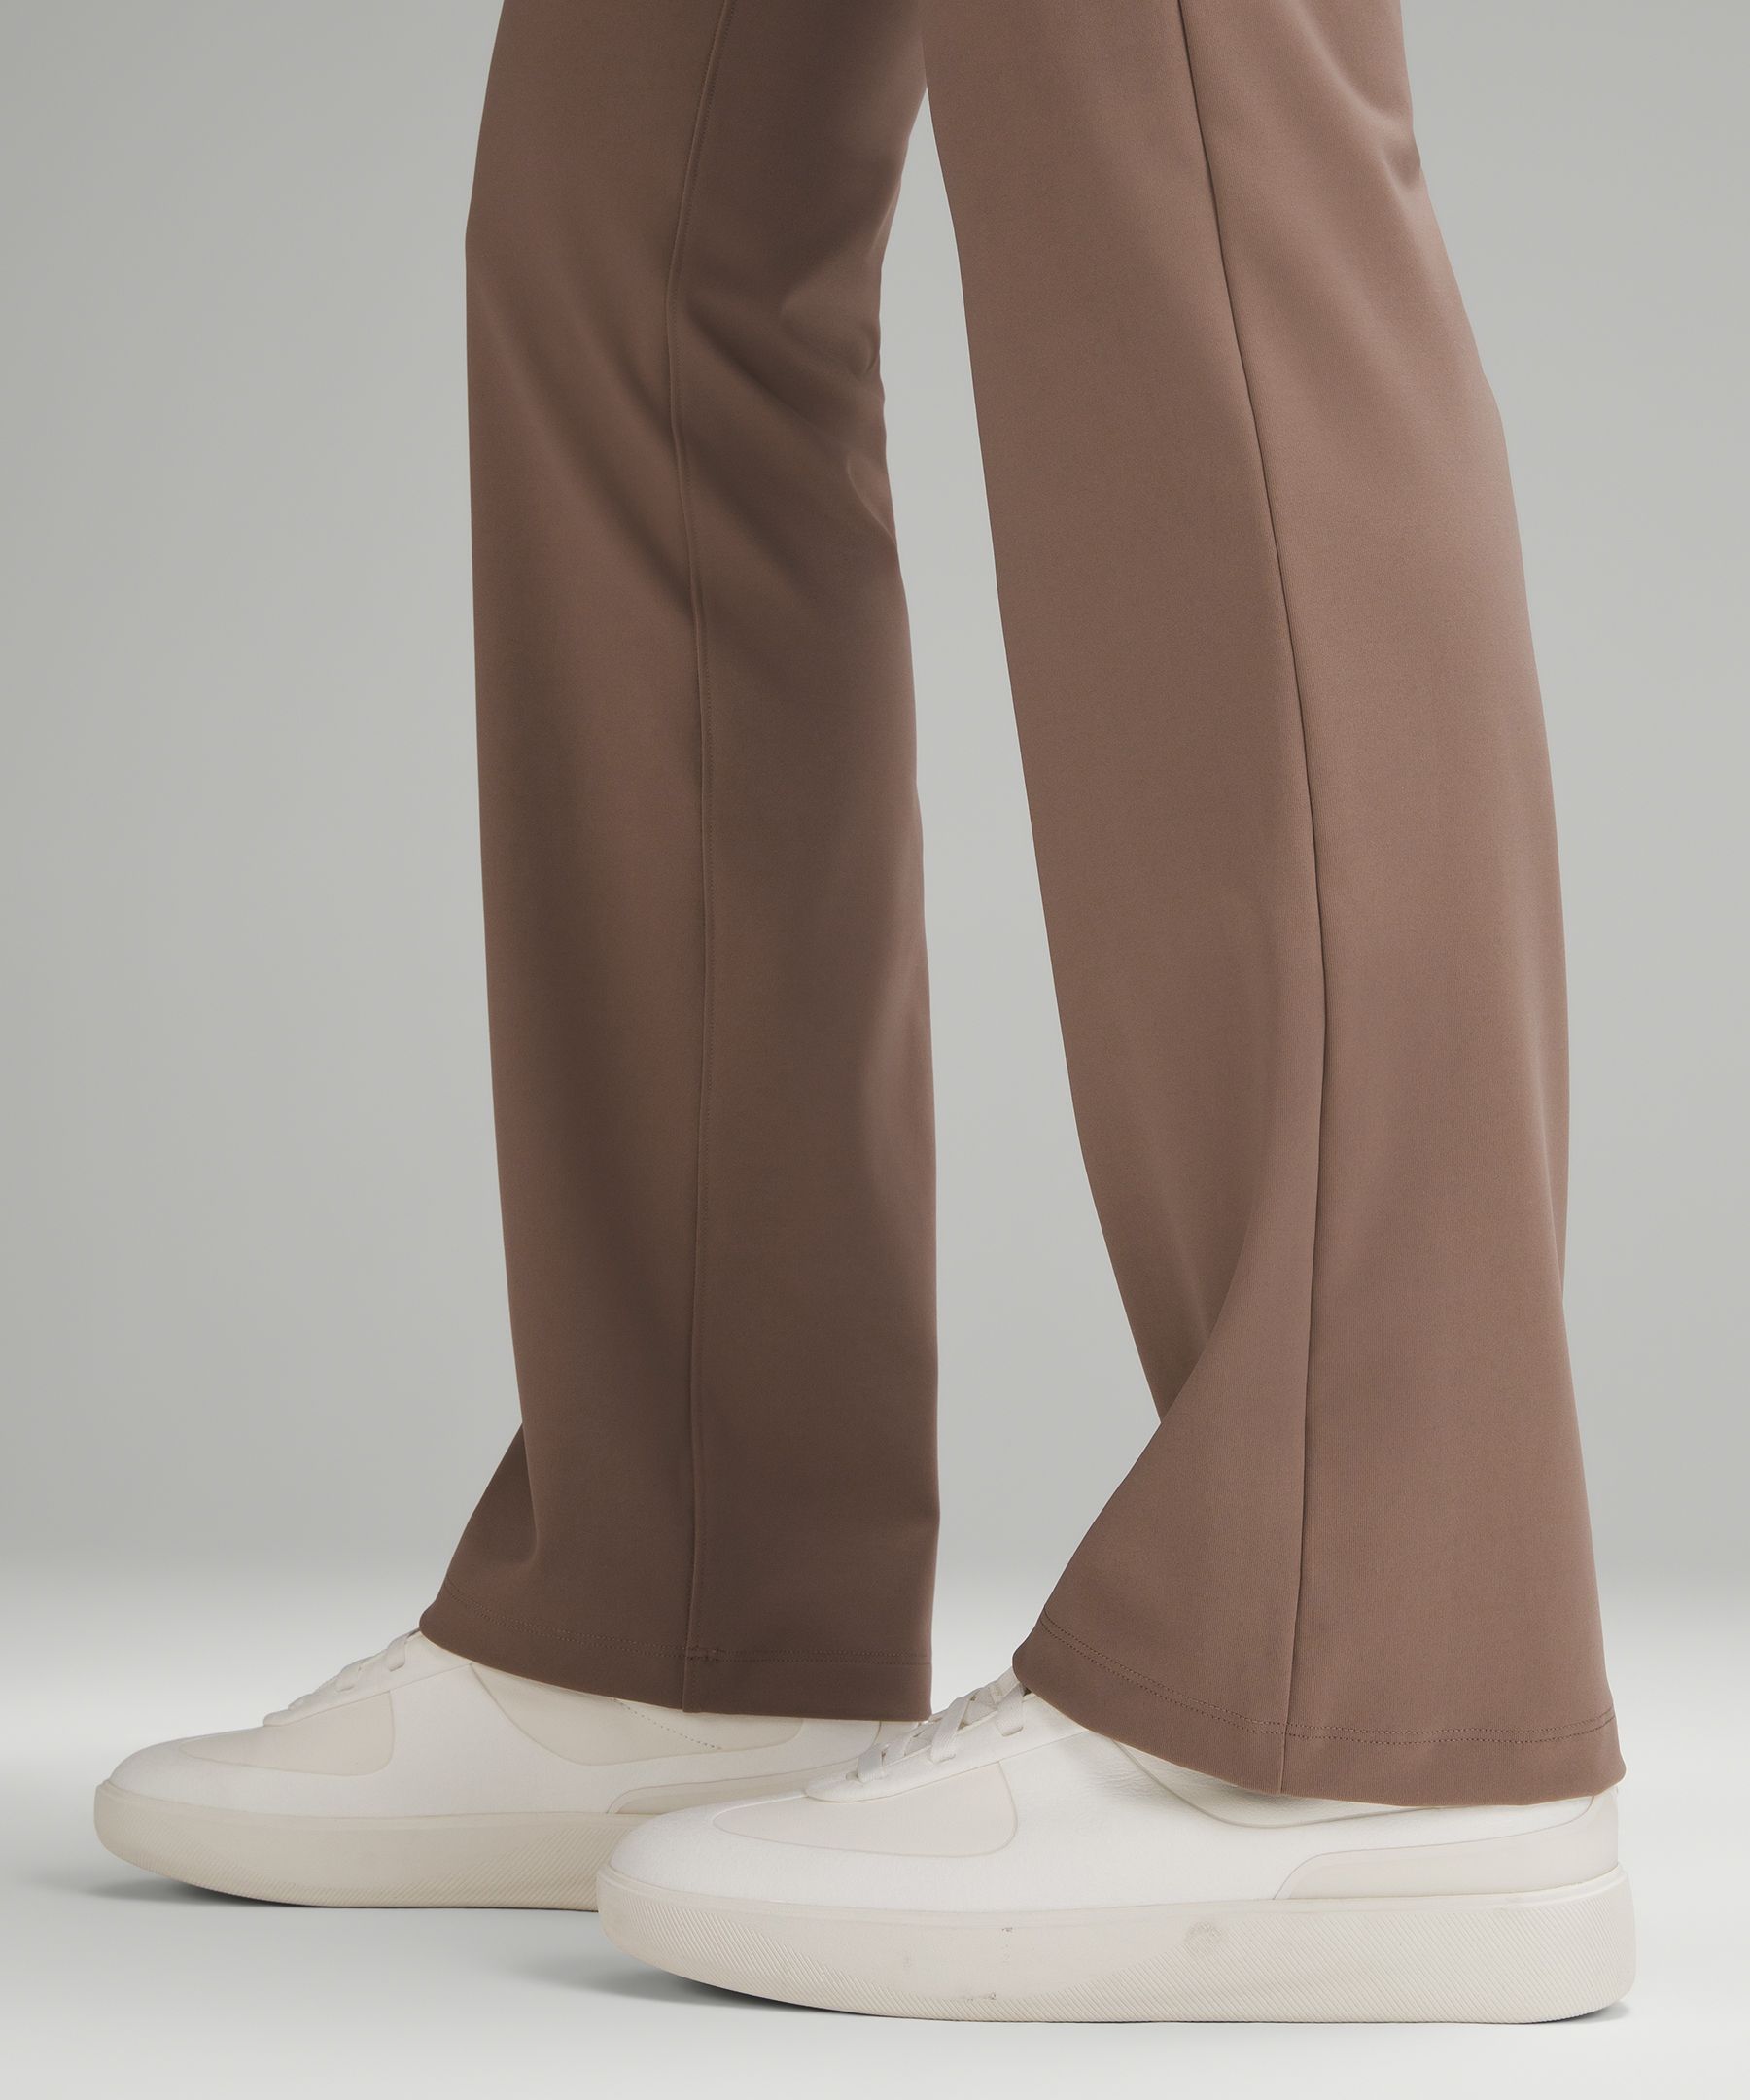 Smooth Fit Pull-On High-Rise Pant *Tall, Women's Pants